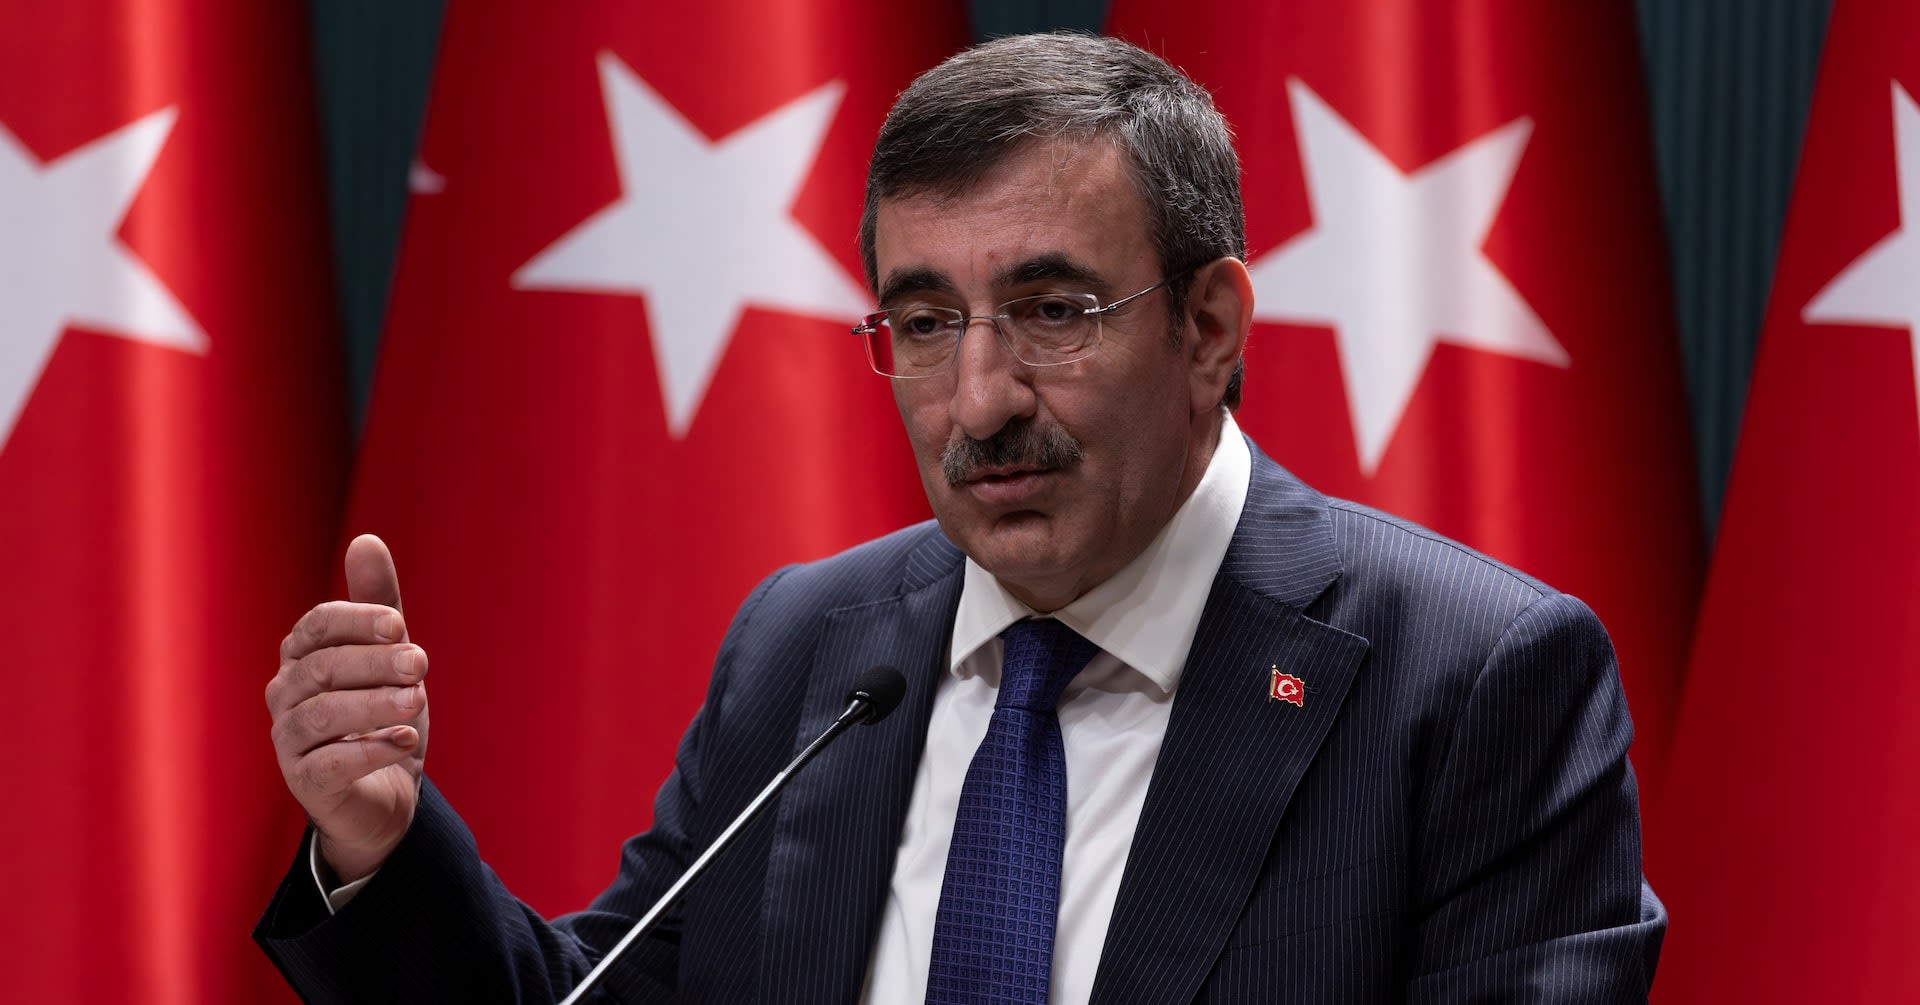 Exclusive: Turkish vice president Yilmaz sees inflation reprieve, with full Erdogan backing